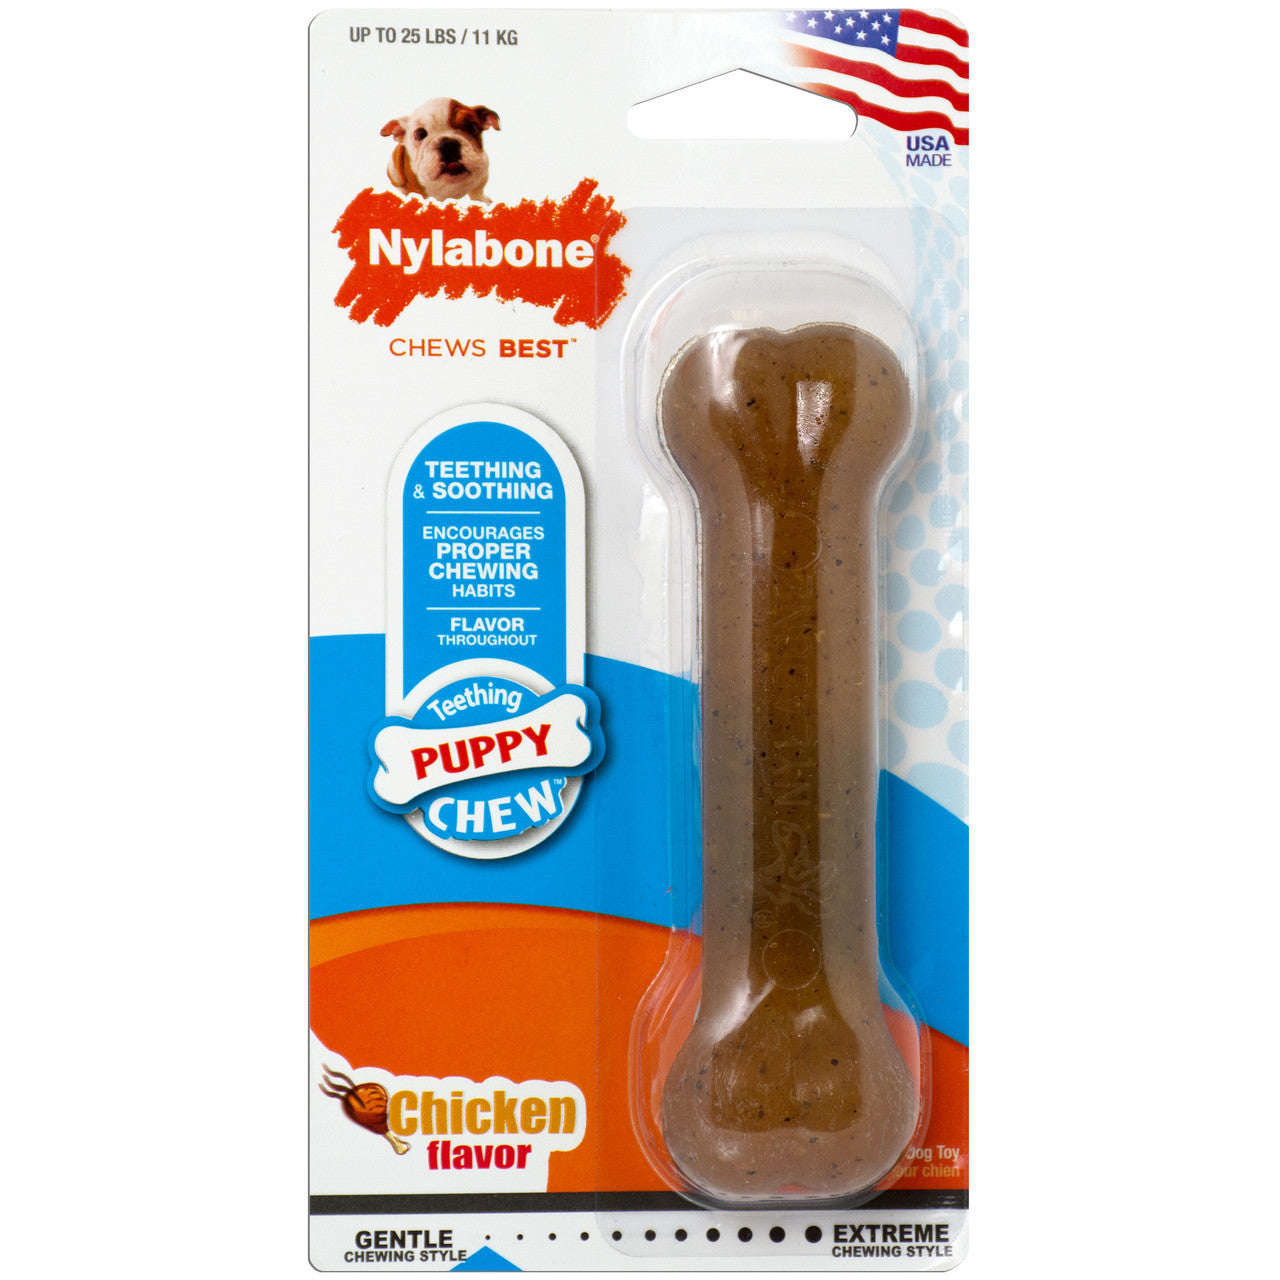 Nylabone Just for Puppies Teething Chew Toy Chicken Small/Regular (1 Count)